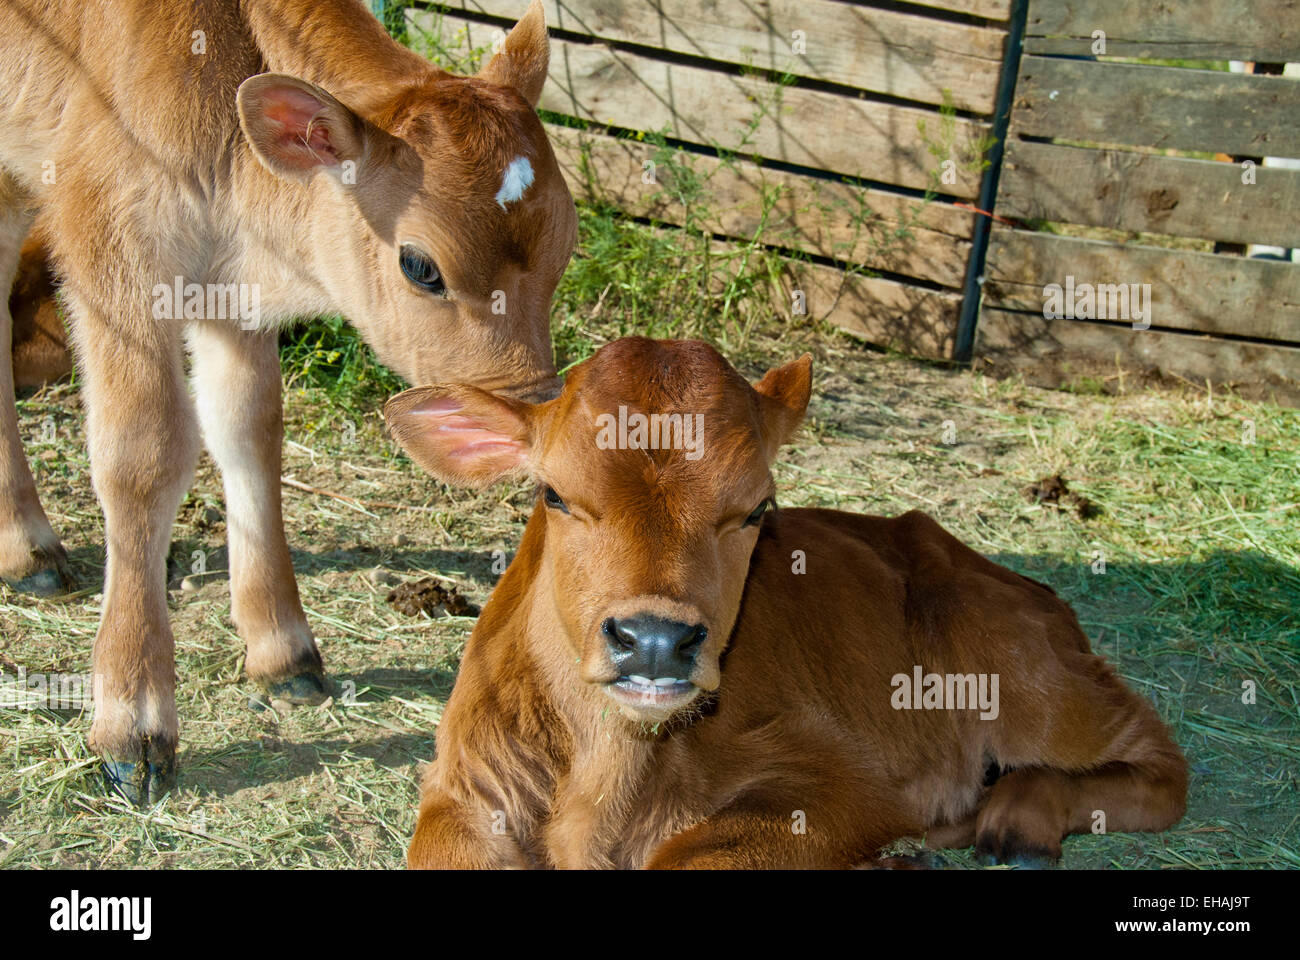 Jersey calves interacting (dairy breed) Stock Photo